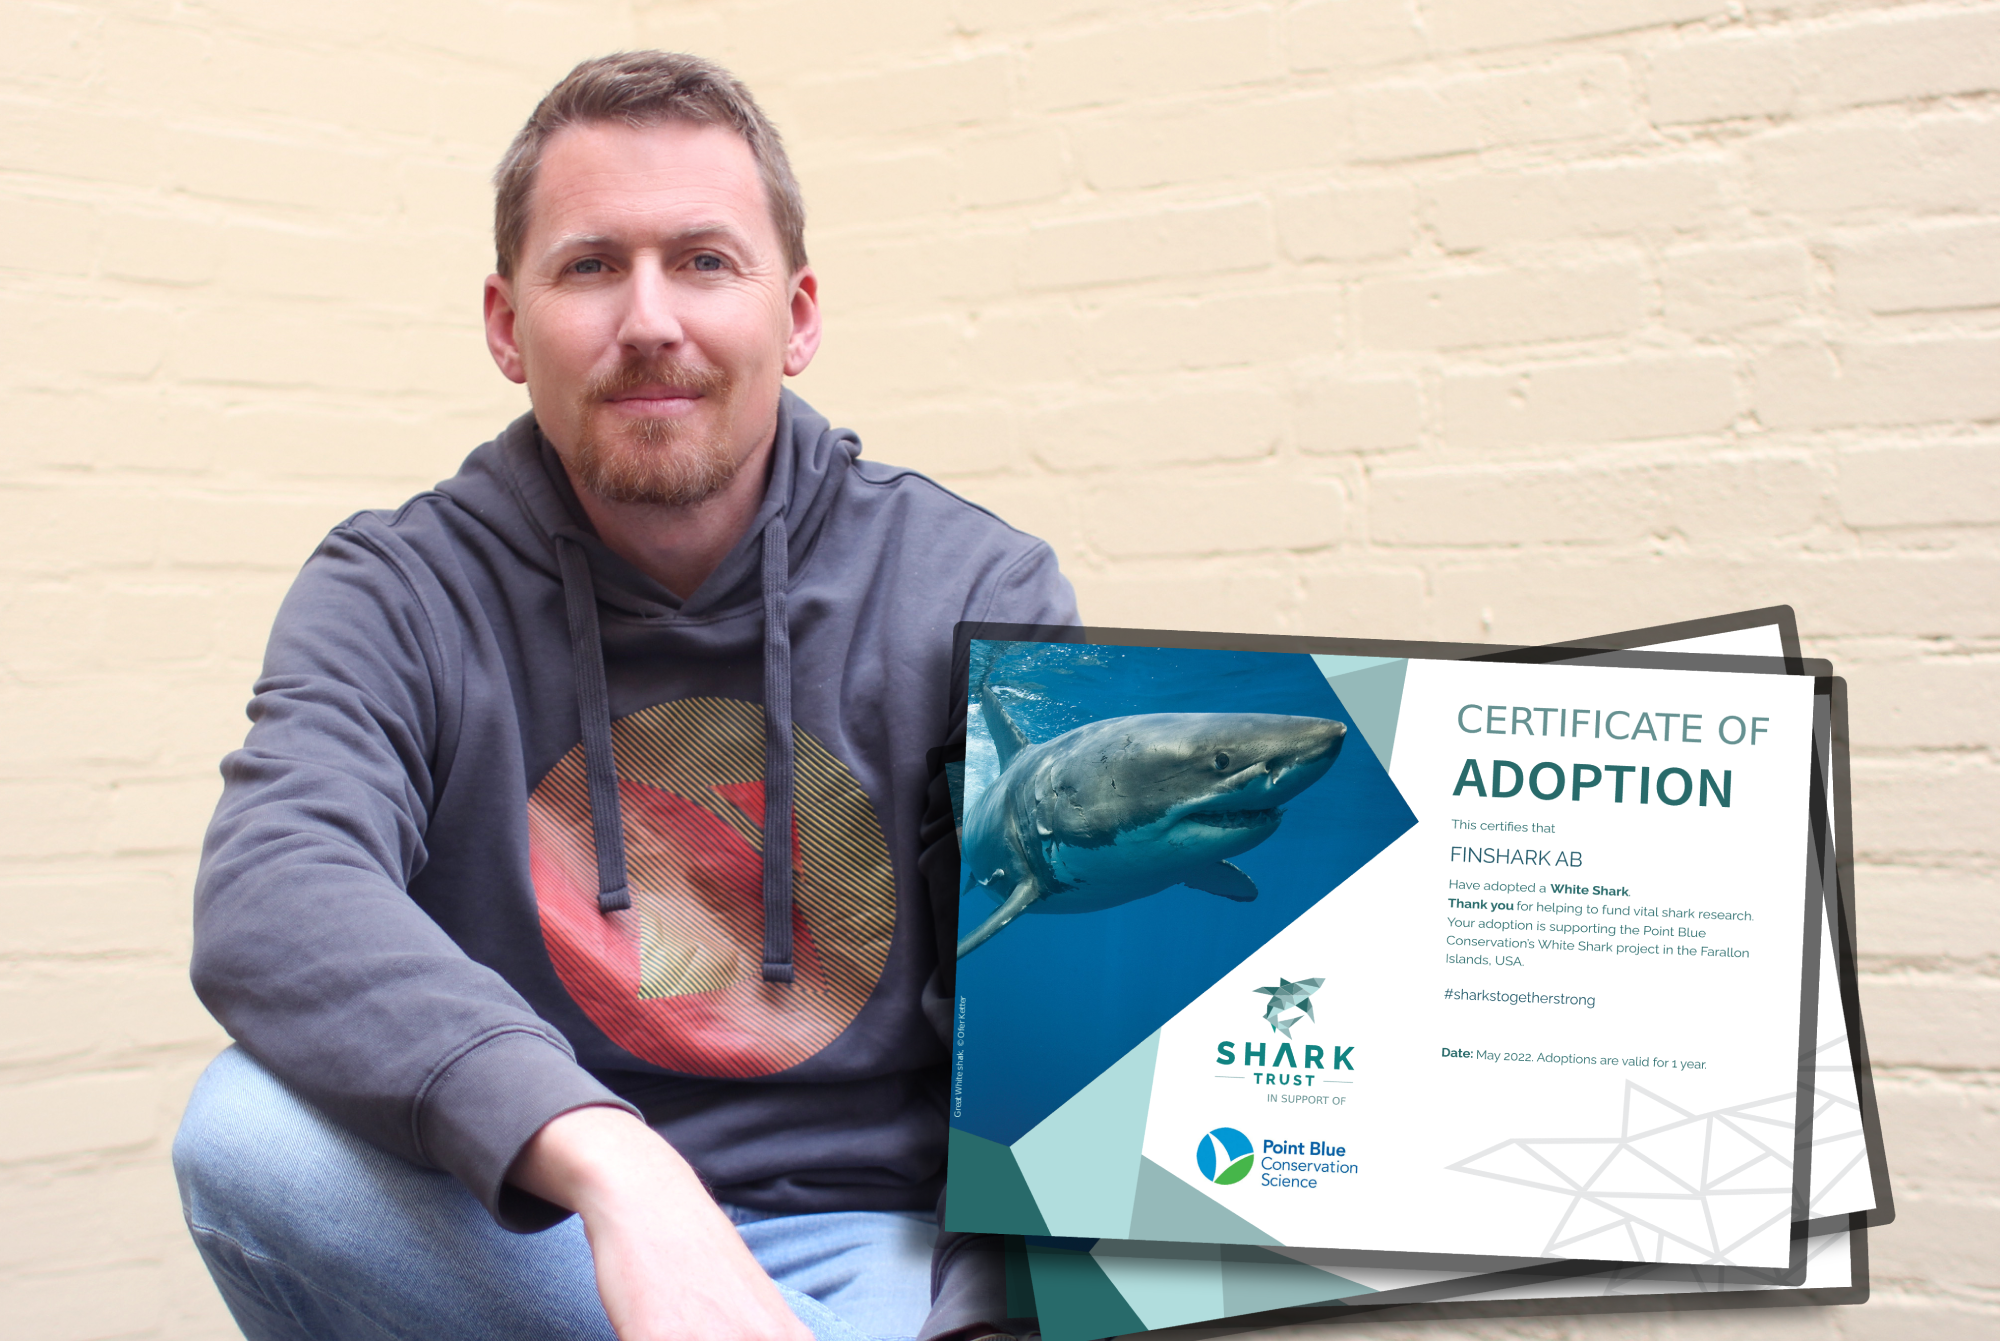 Kristian Sternros with certificate from Shark Trust